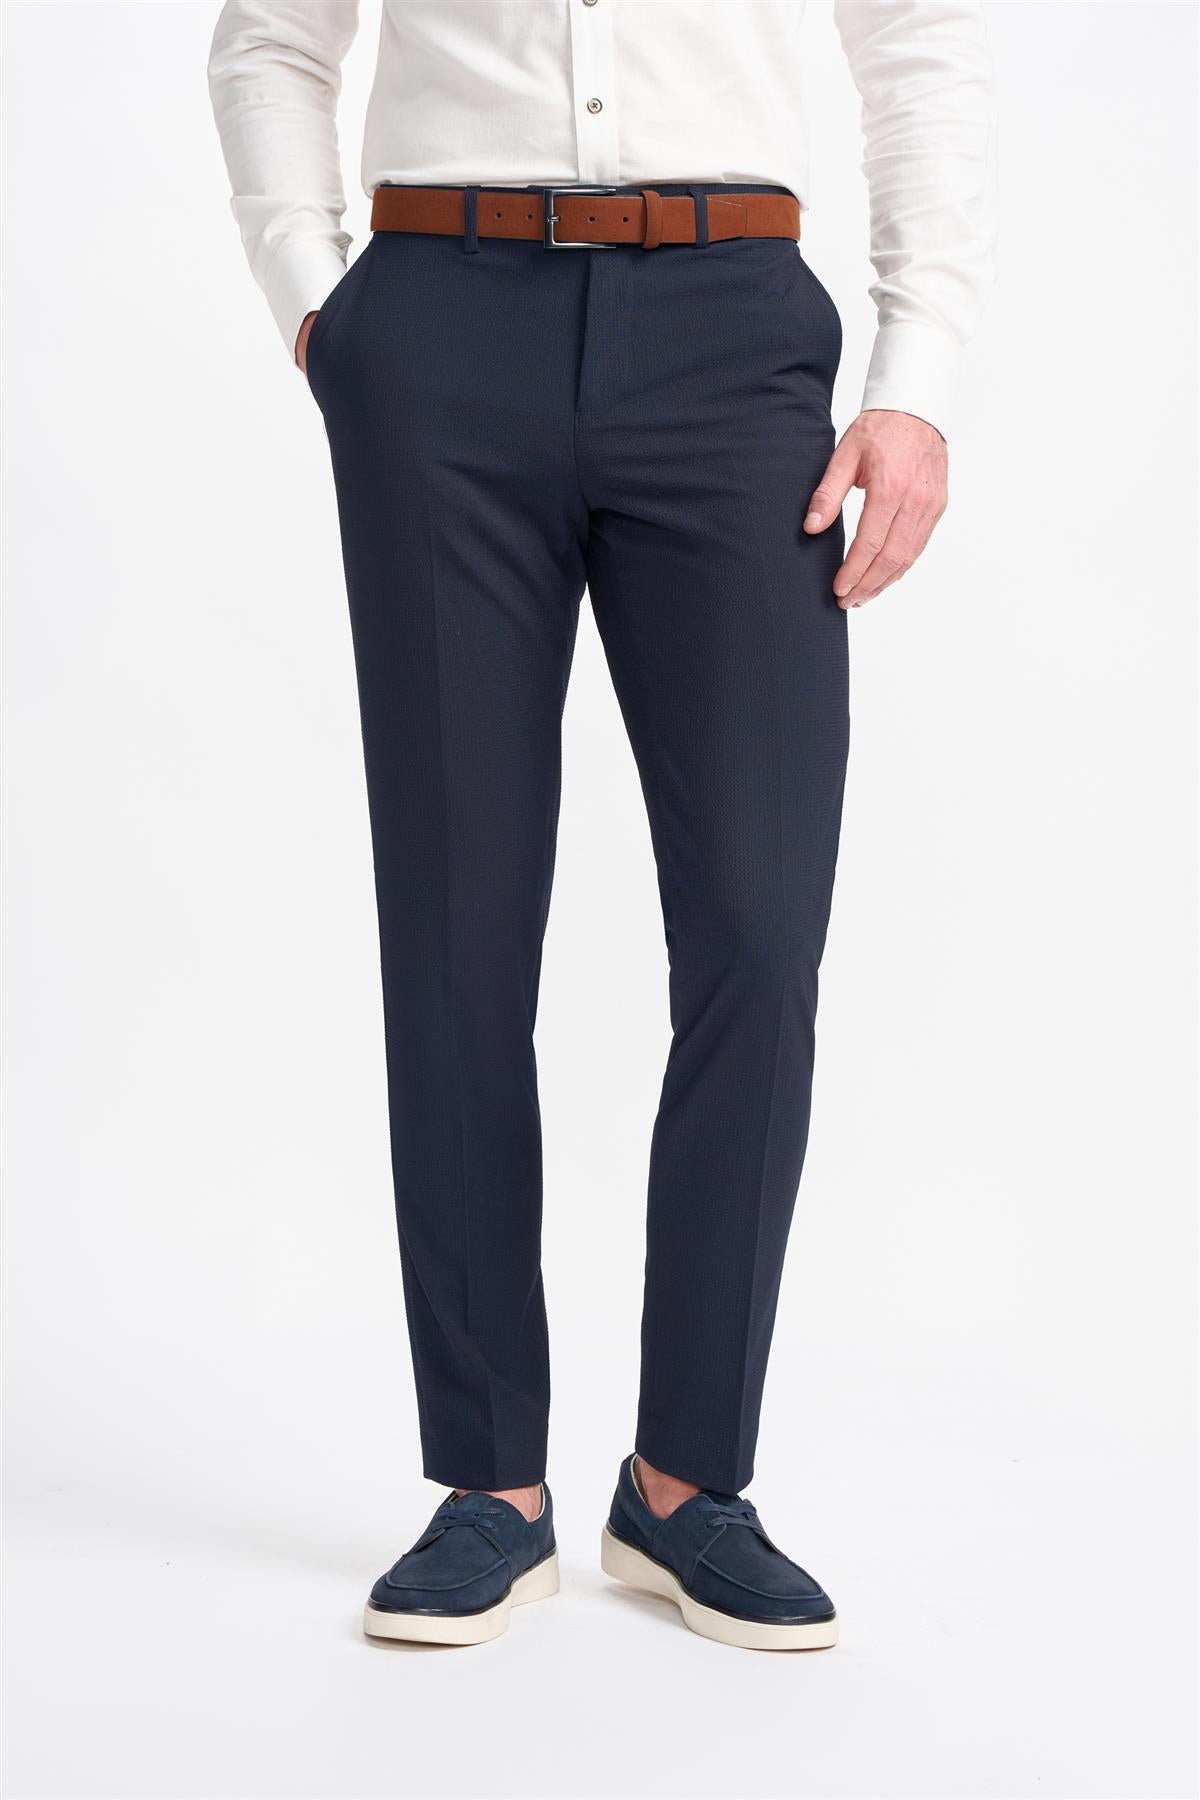 Siren Navy Trousers Front